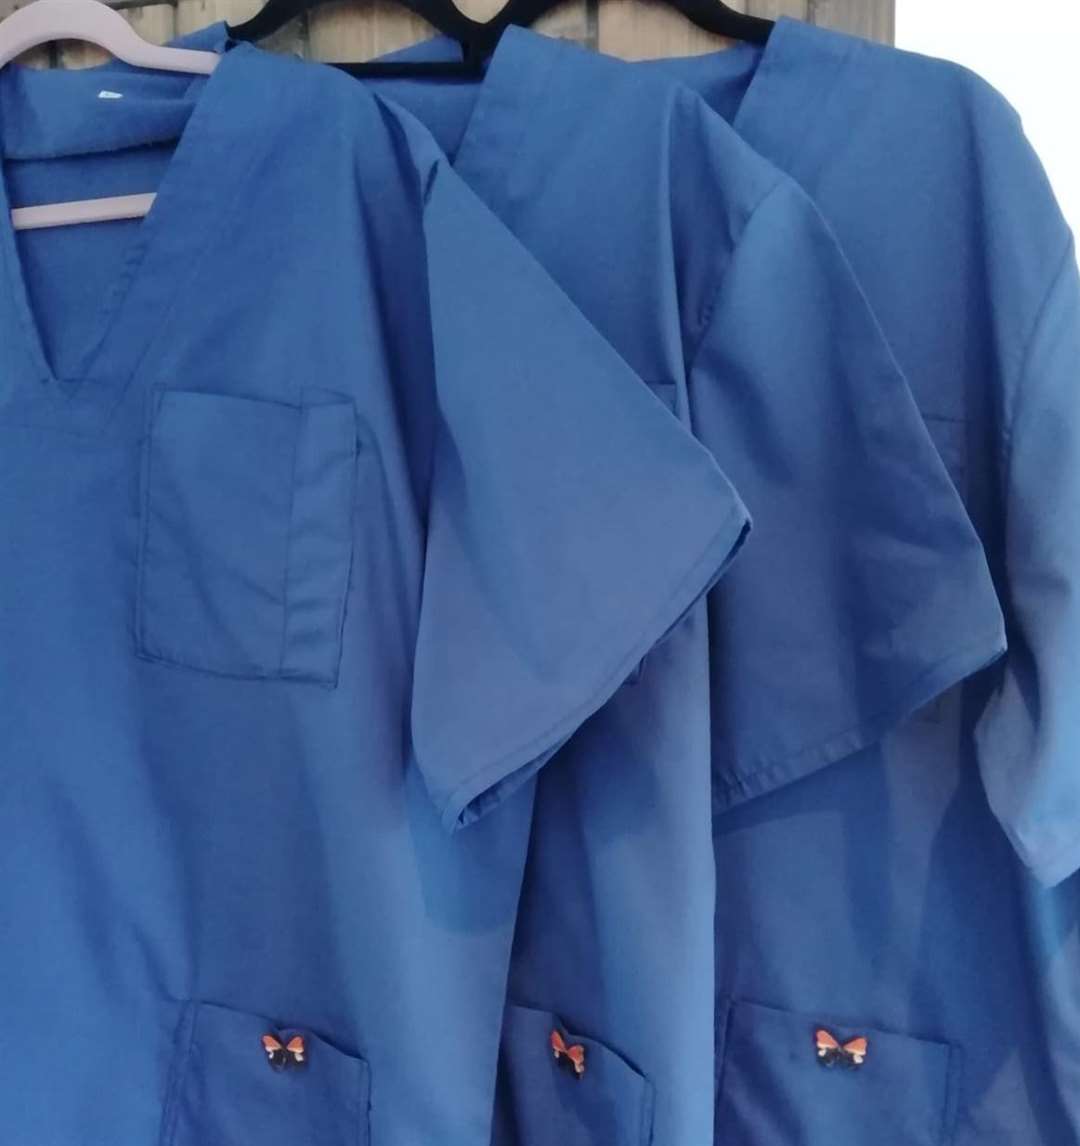 More than 750 sets of scrubs have been made